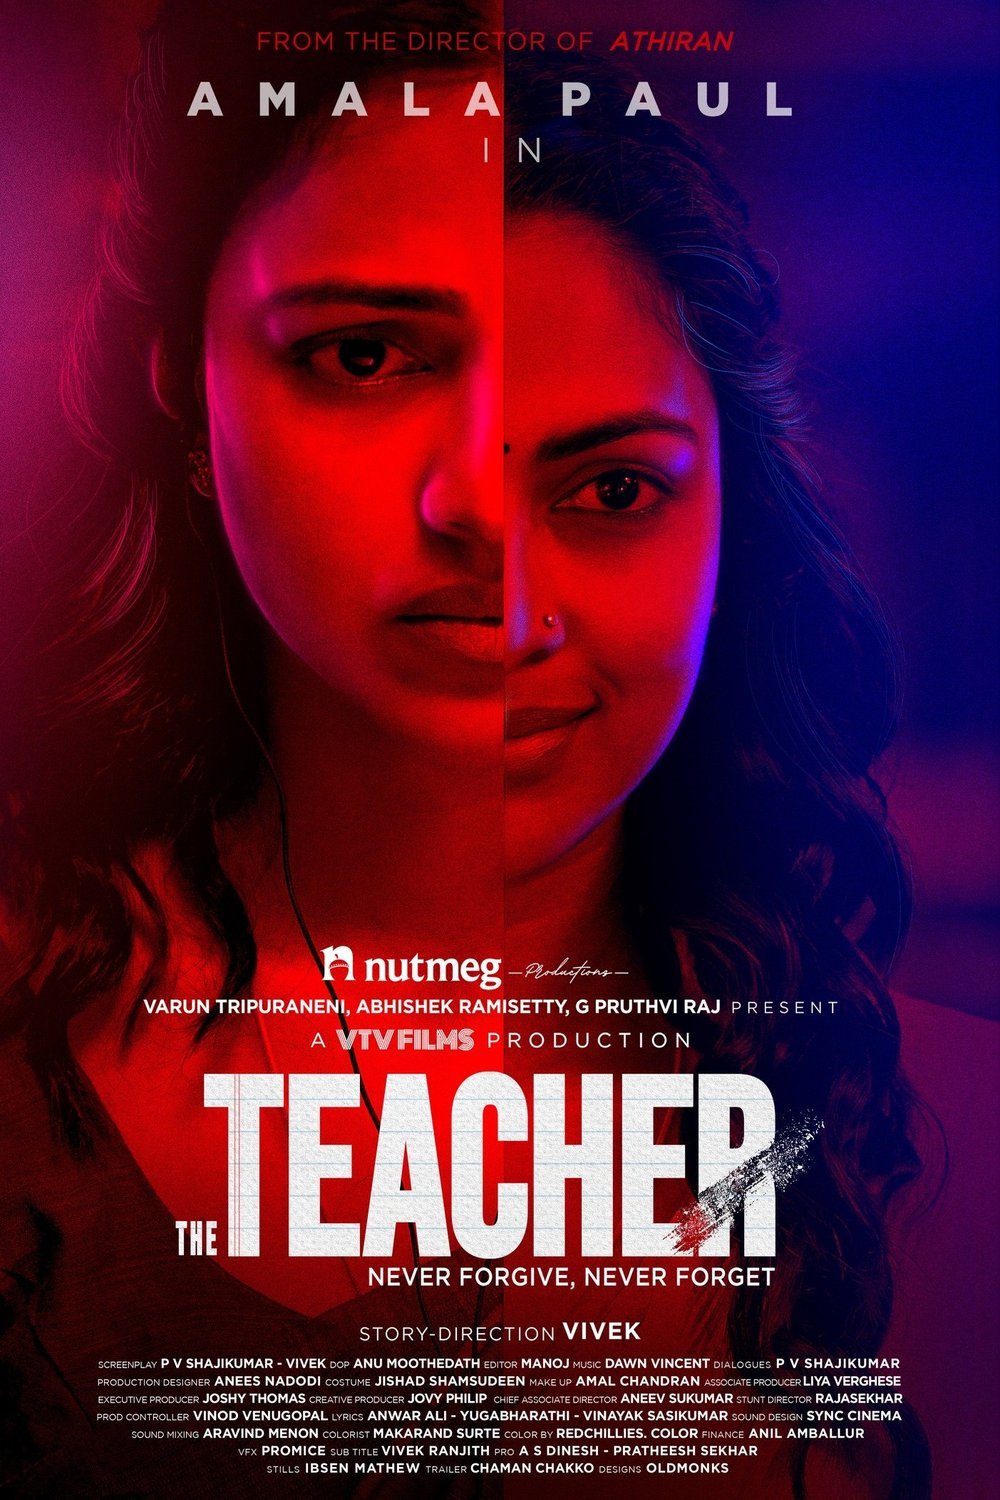 Malayalam poster of the movie The Teacher